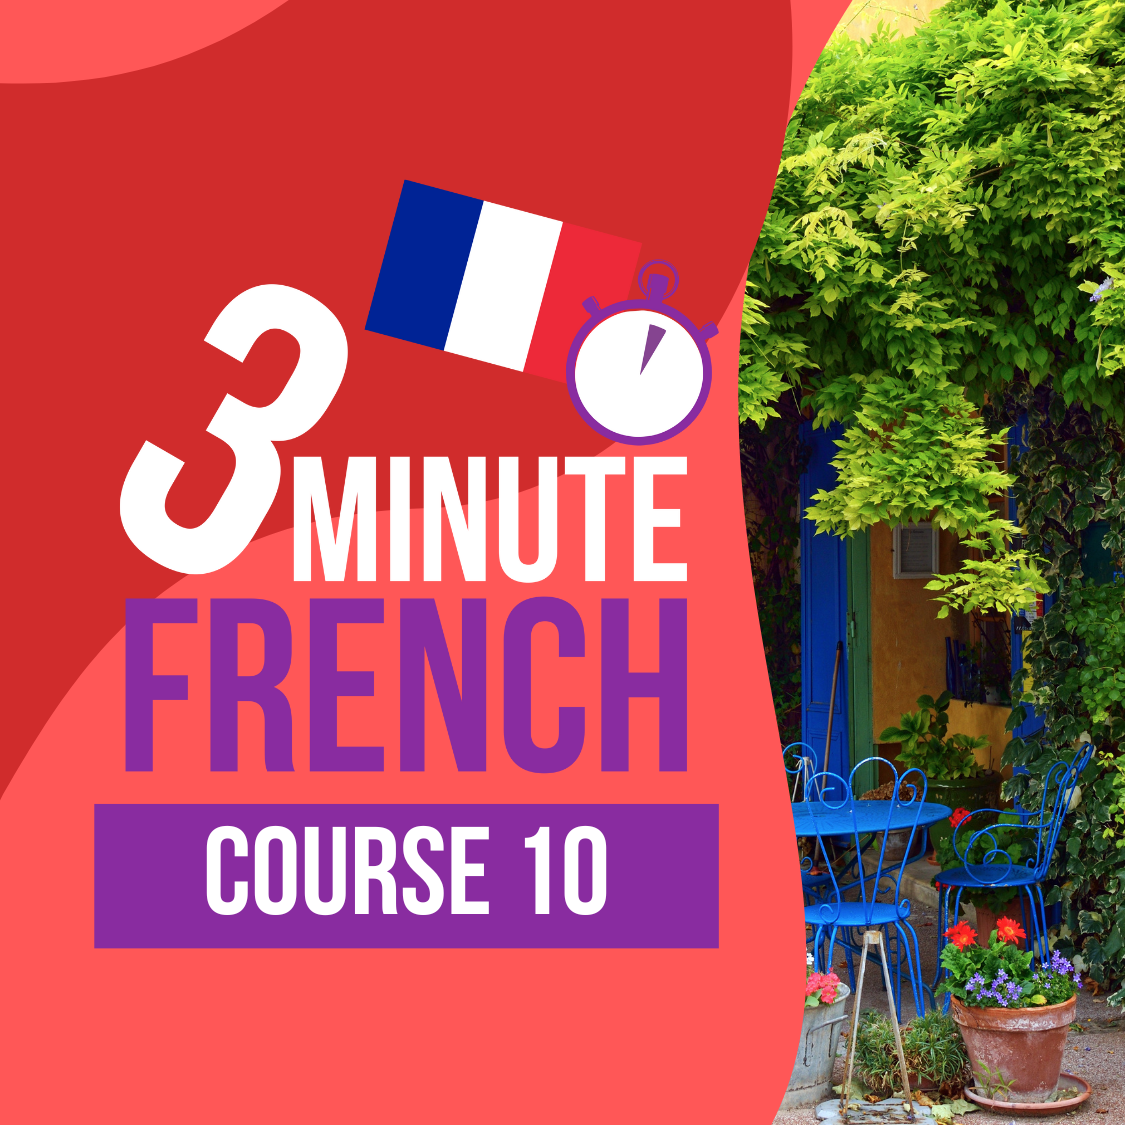 3 Minute French - Course 10